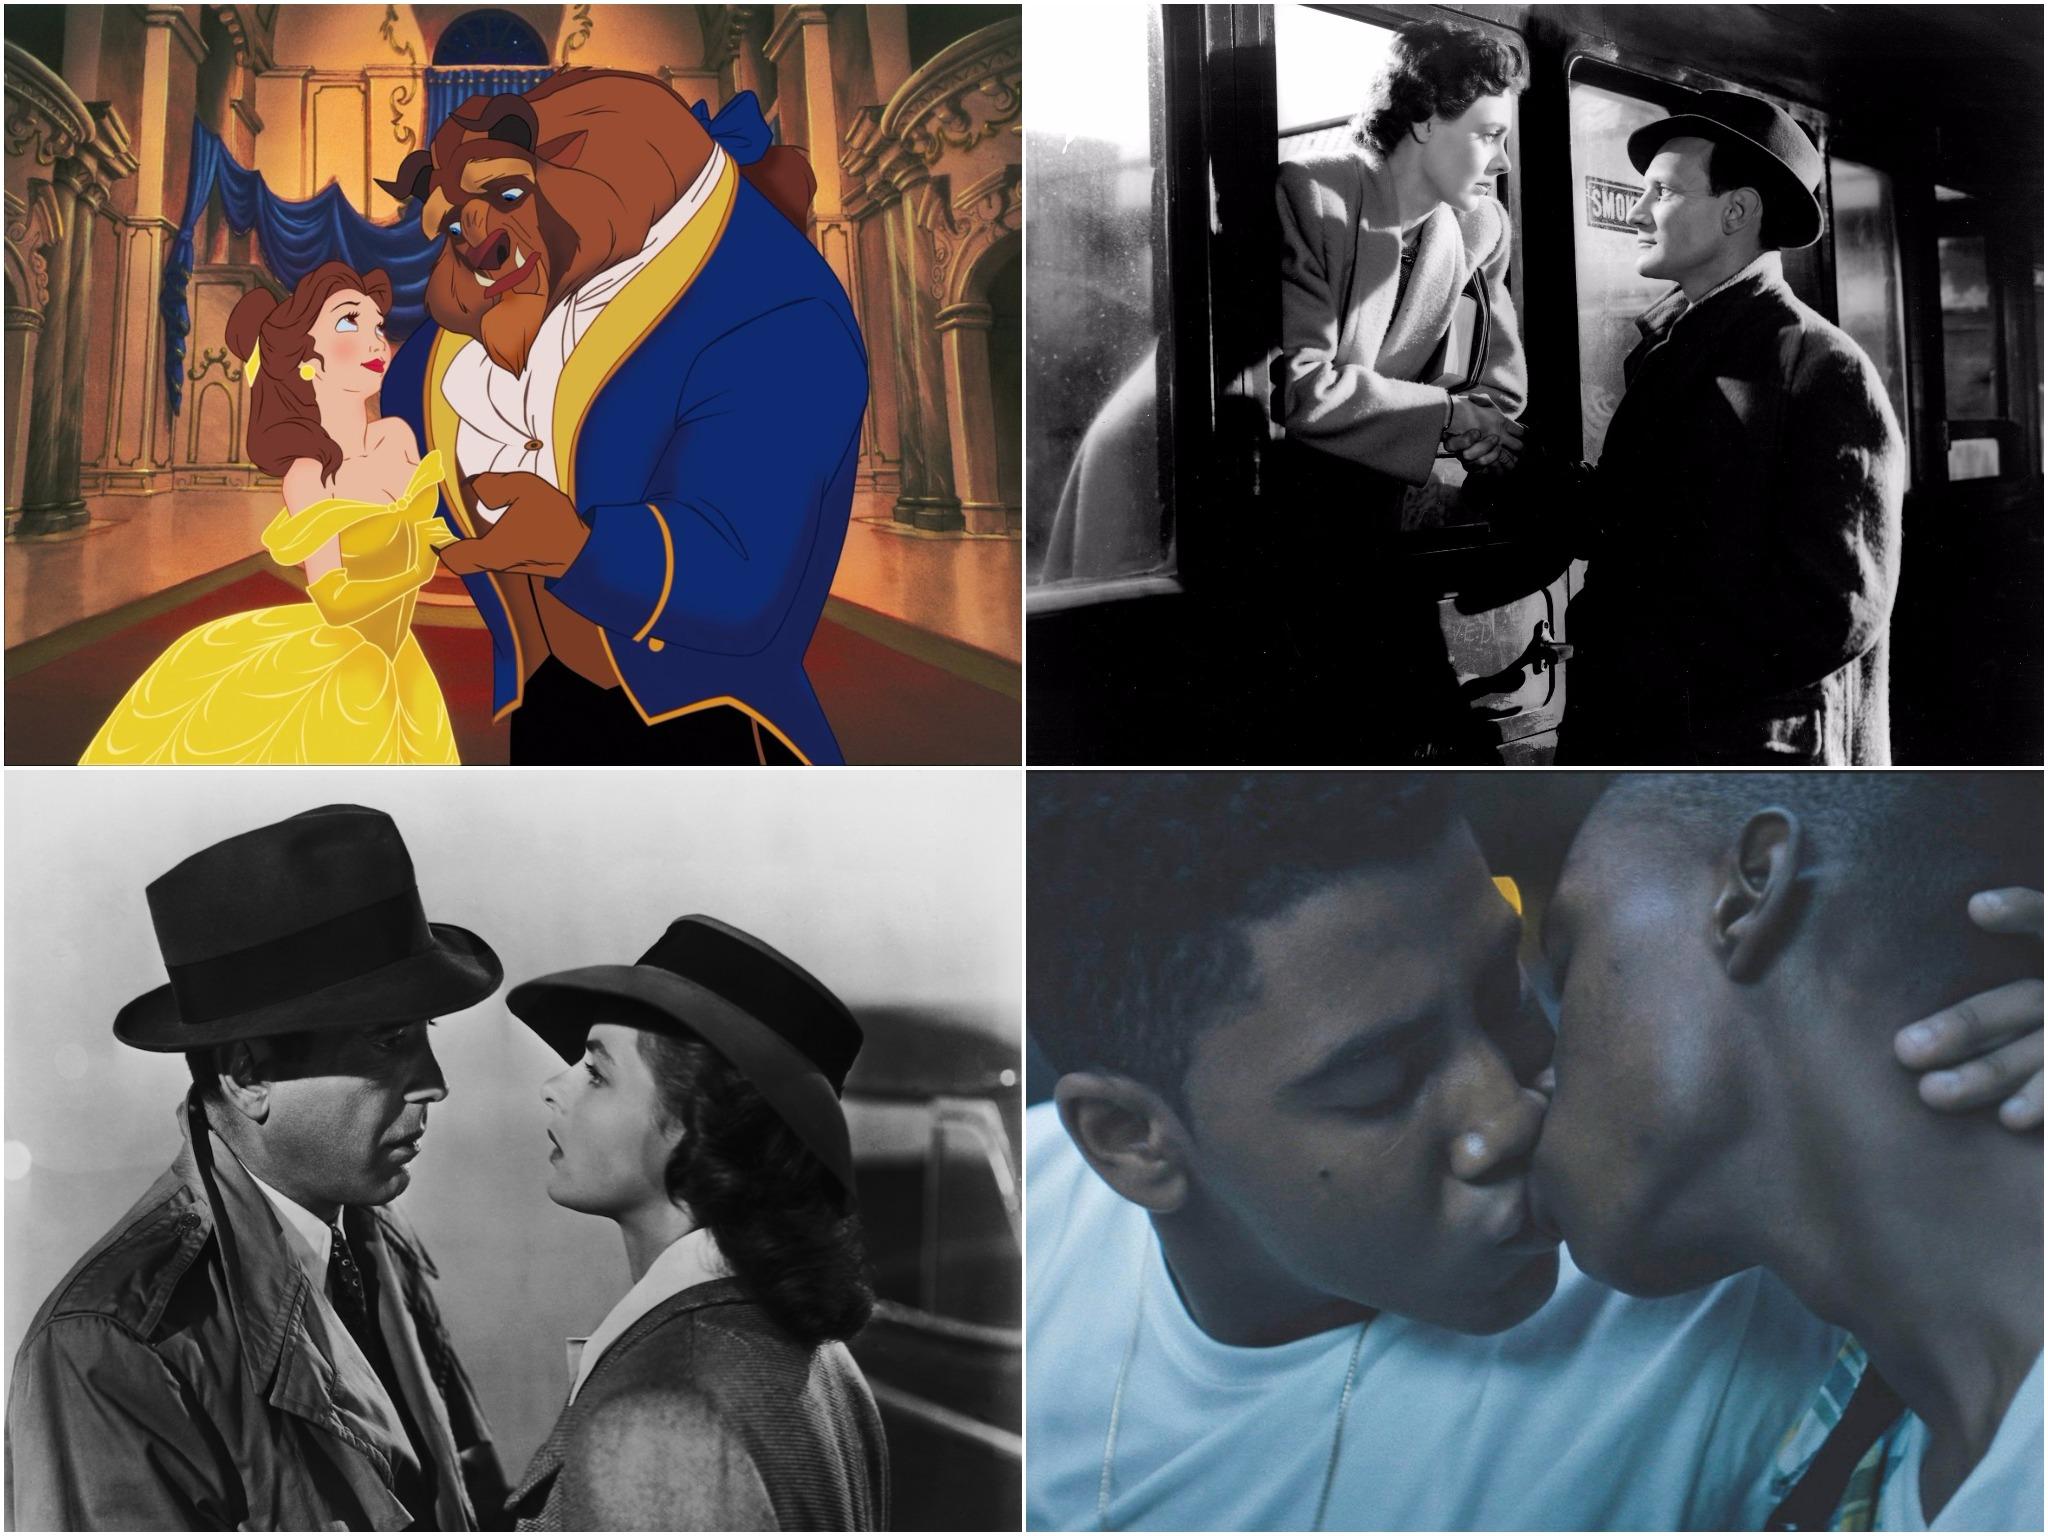 Clockwise from top right: Beauty and the Beast, Brief Encounter, Moonlight and Casablanca